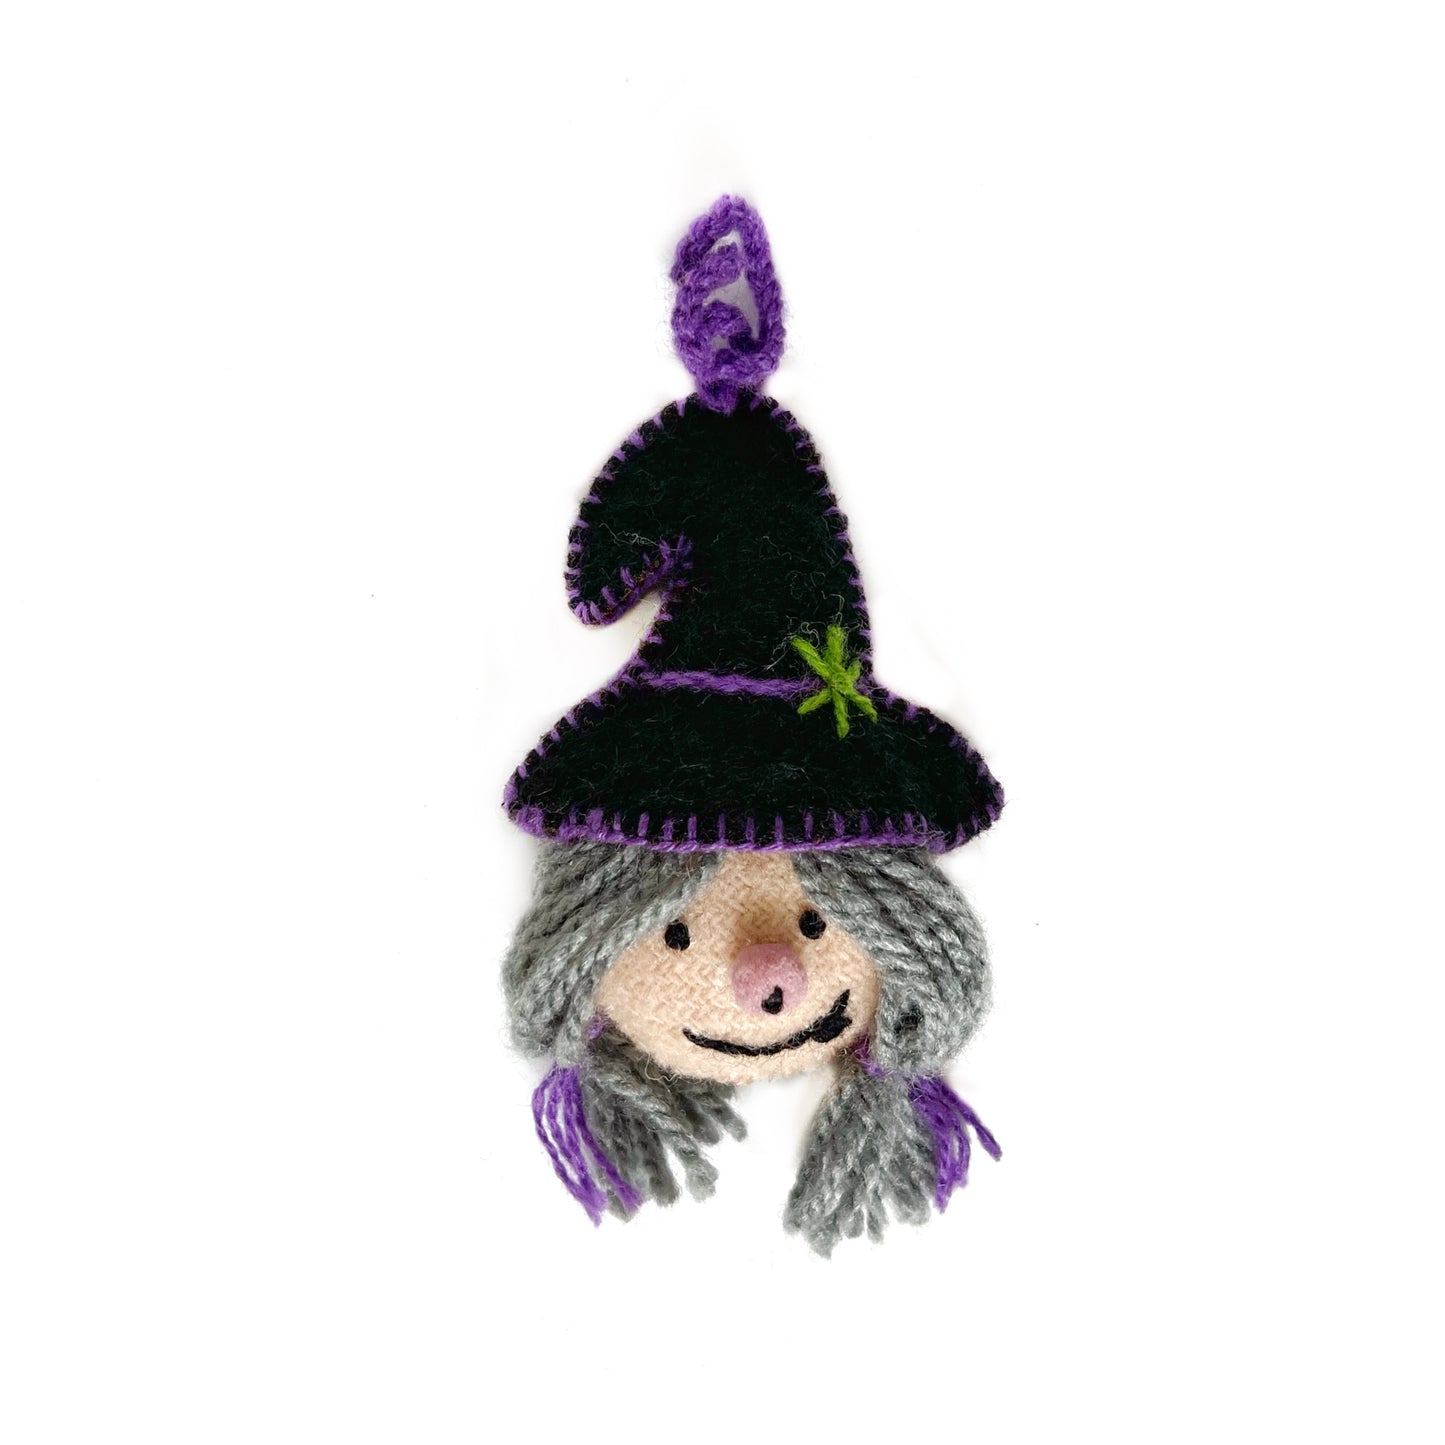 Colorful Halloween Ornament: Witch